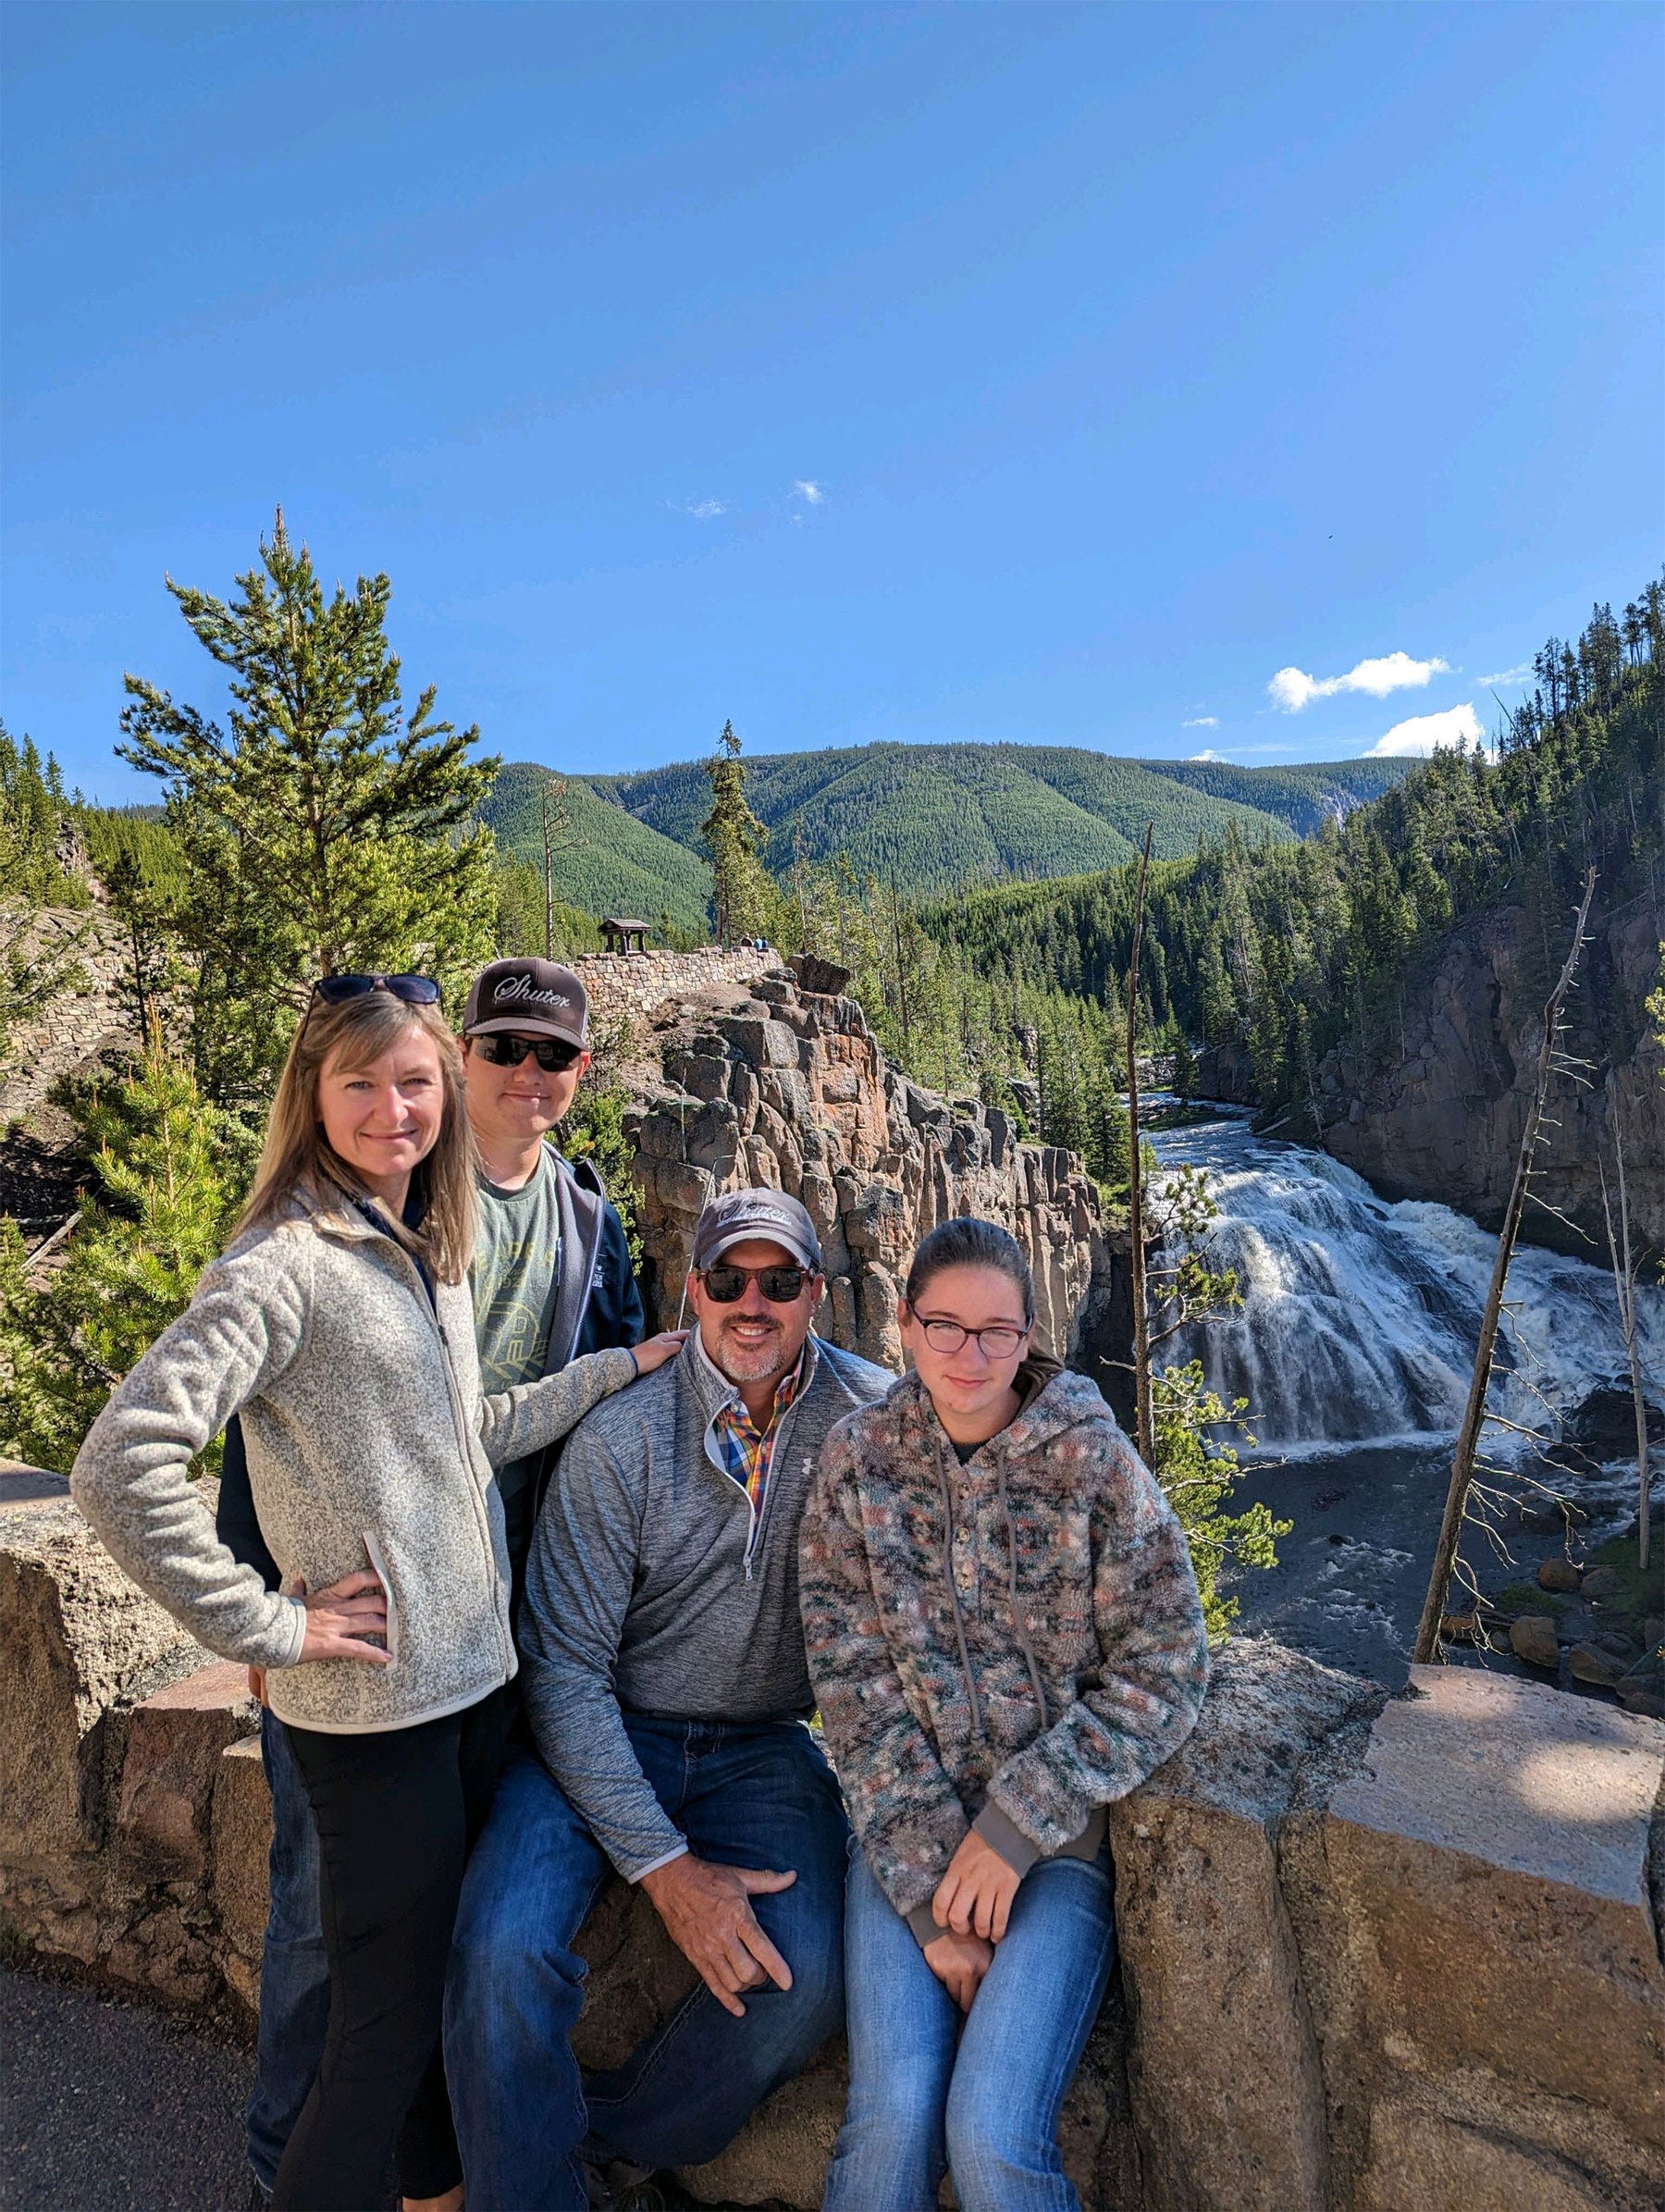 Sarah, Jacob, Brian and Carly Shuter pose in front of a river and small mountains covered with trees